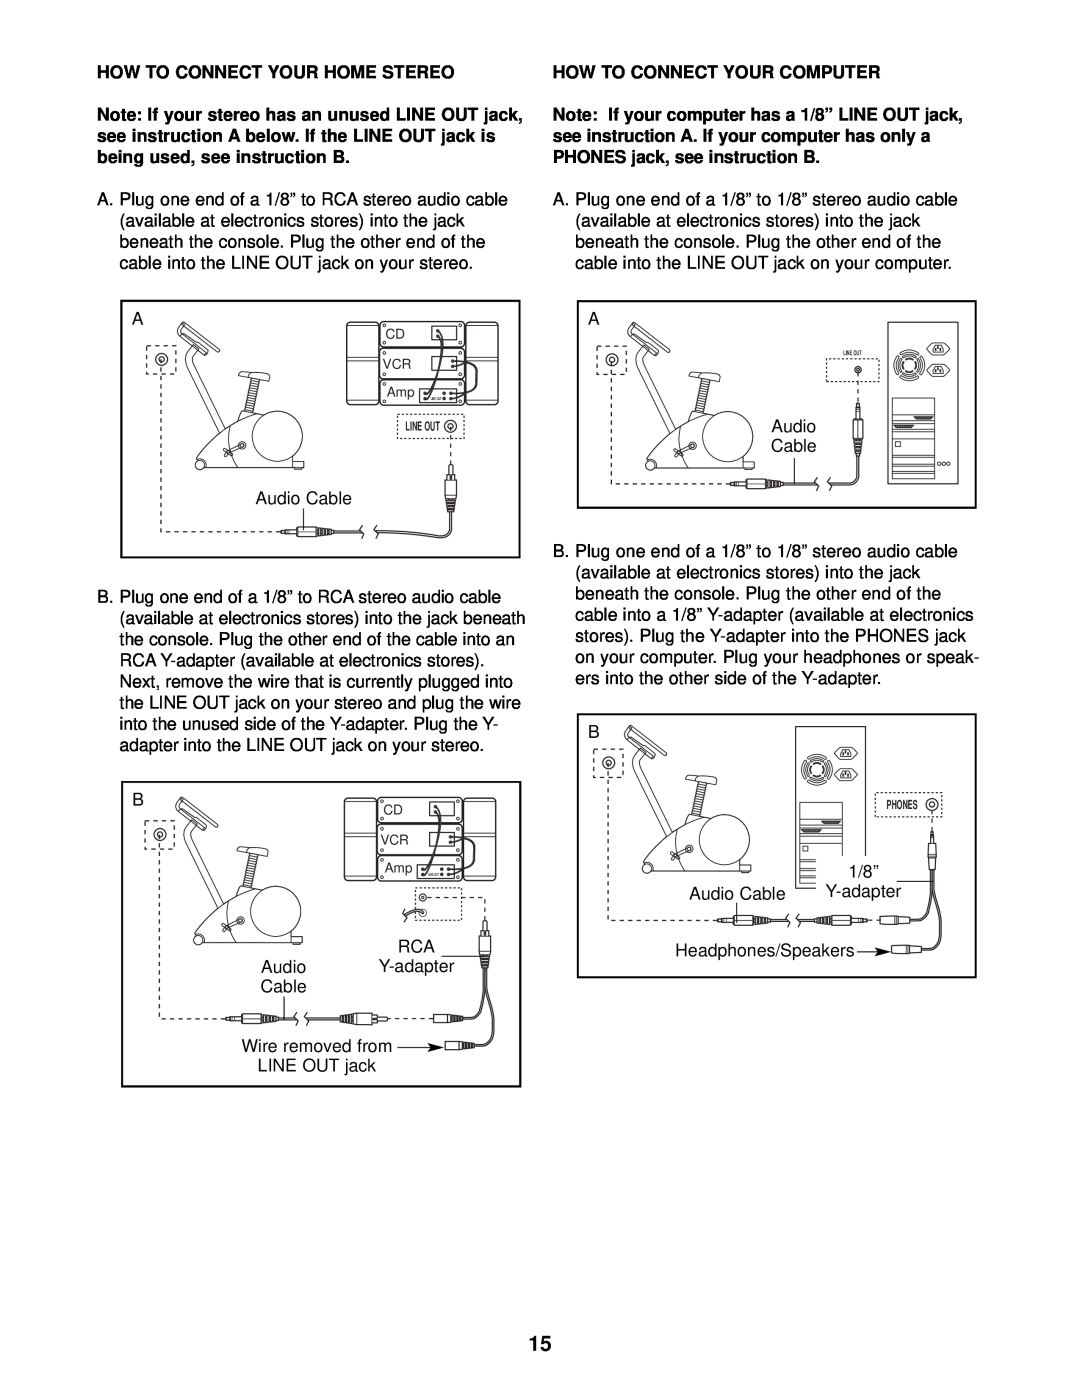 ProForm PFEX39910 user manual How To Connect Your Home Stereo, How To Connect Your Computer, Line Out 